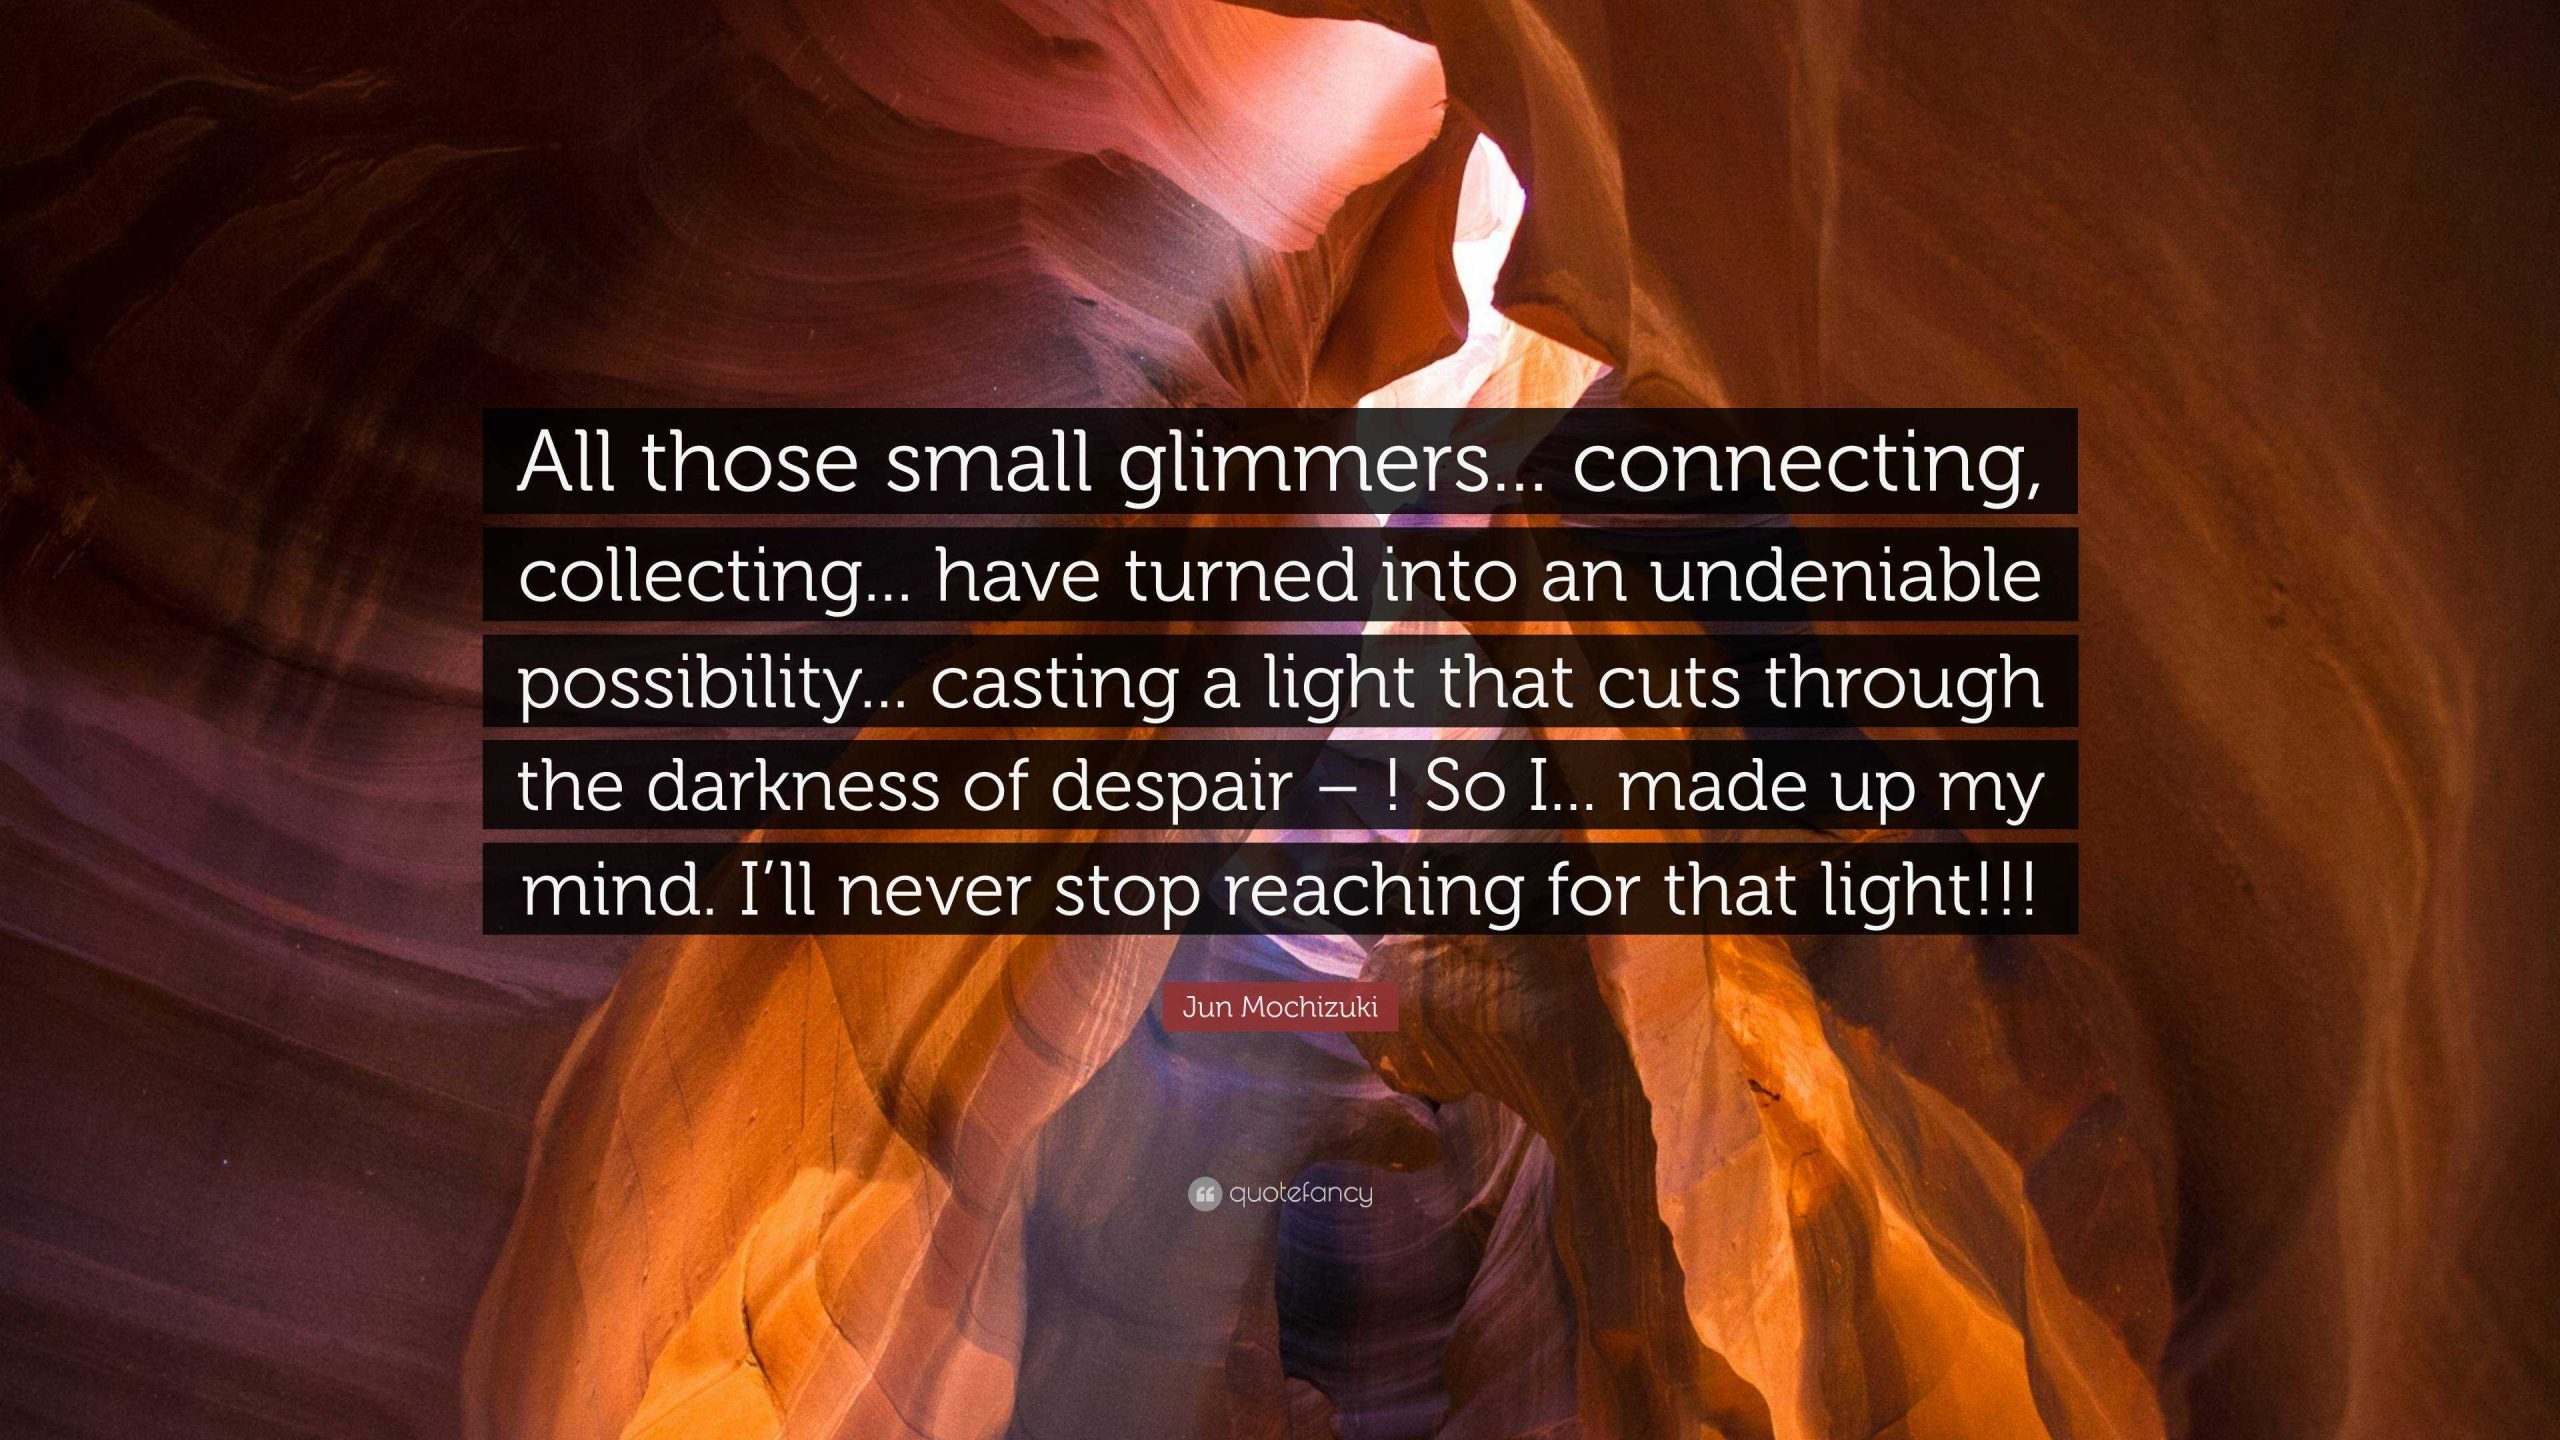 Glimmers: The Fundamental Fairy Dust for Happiness